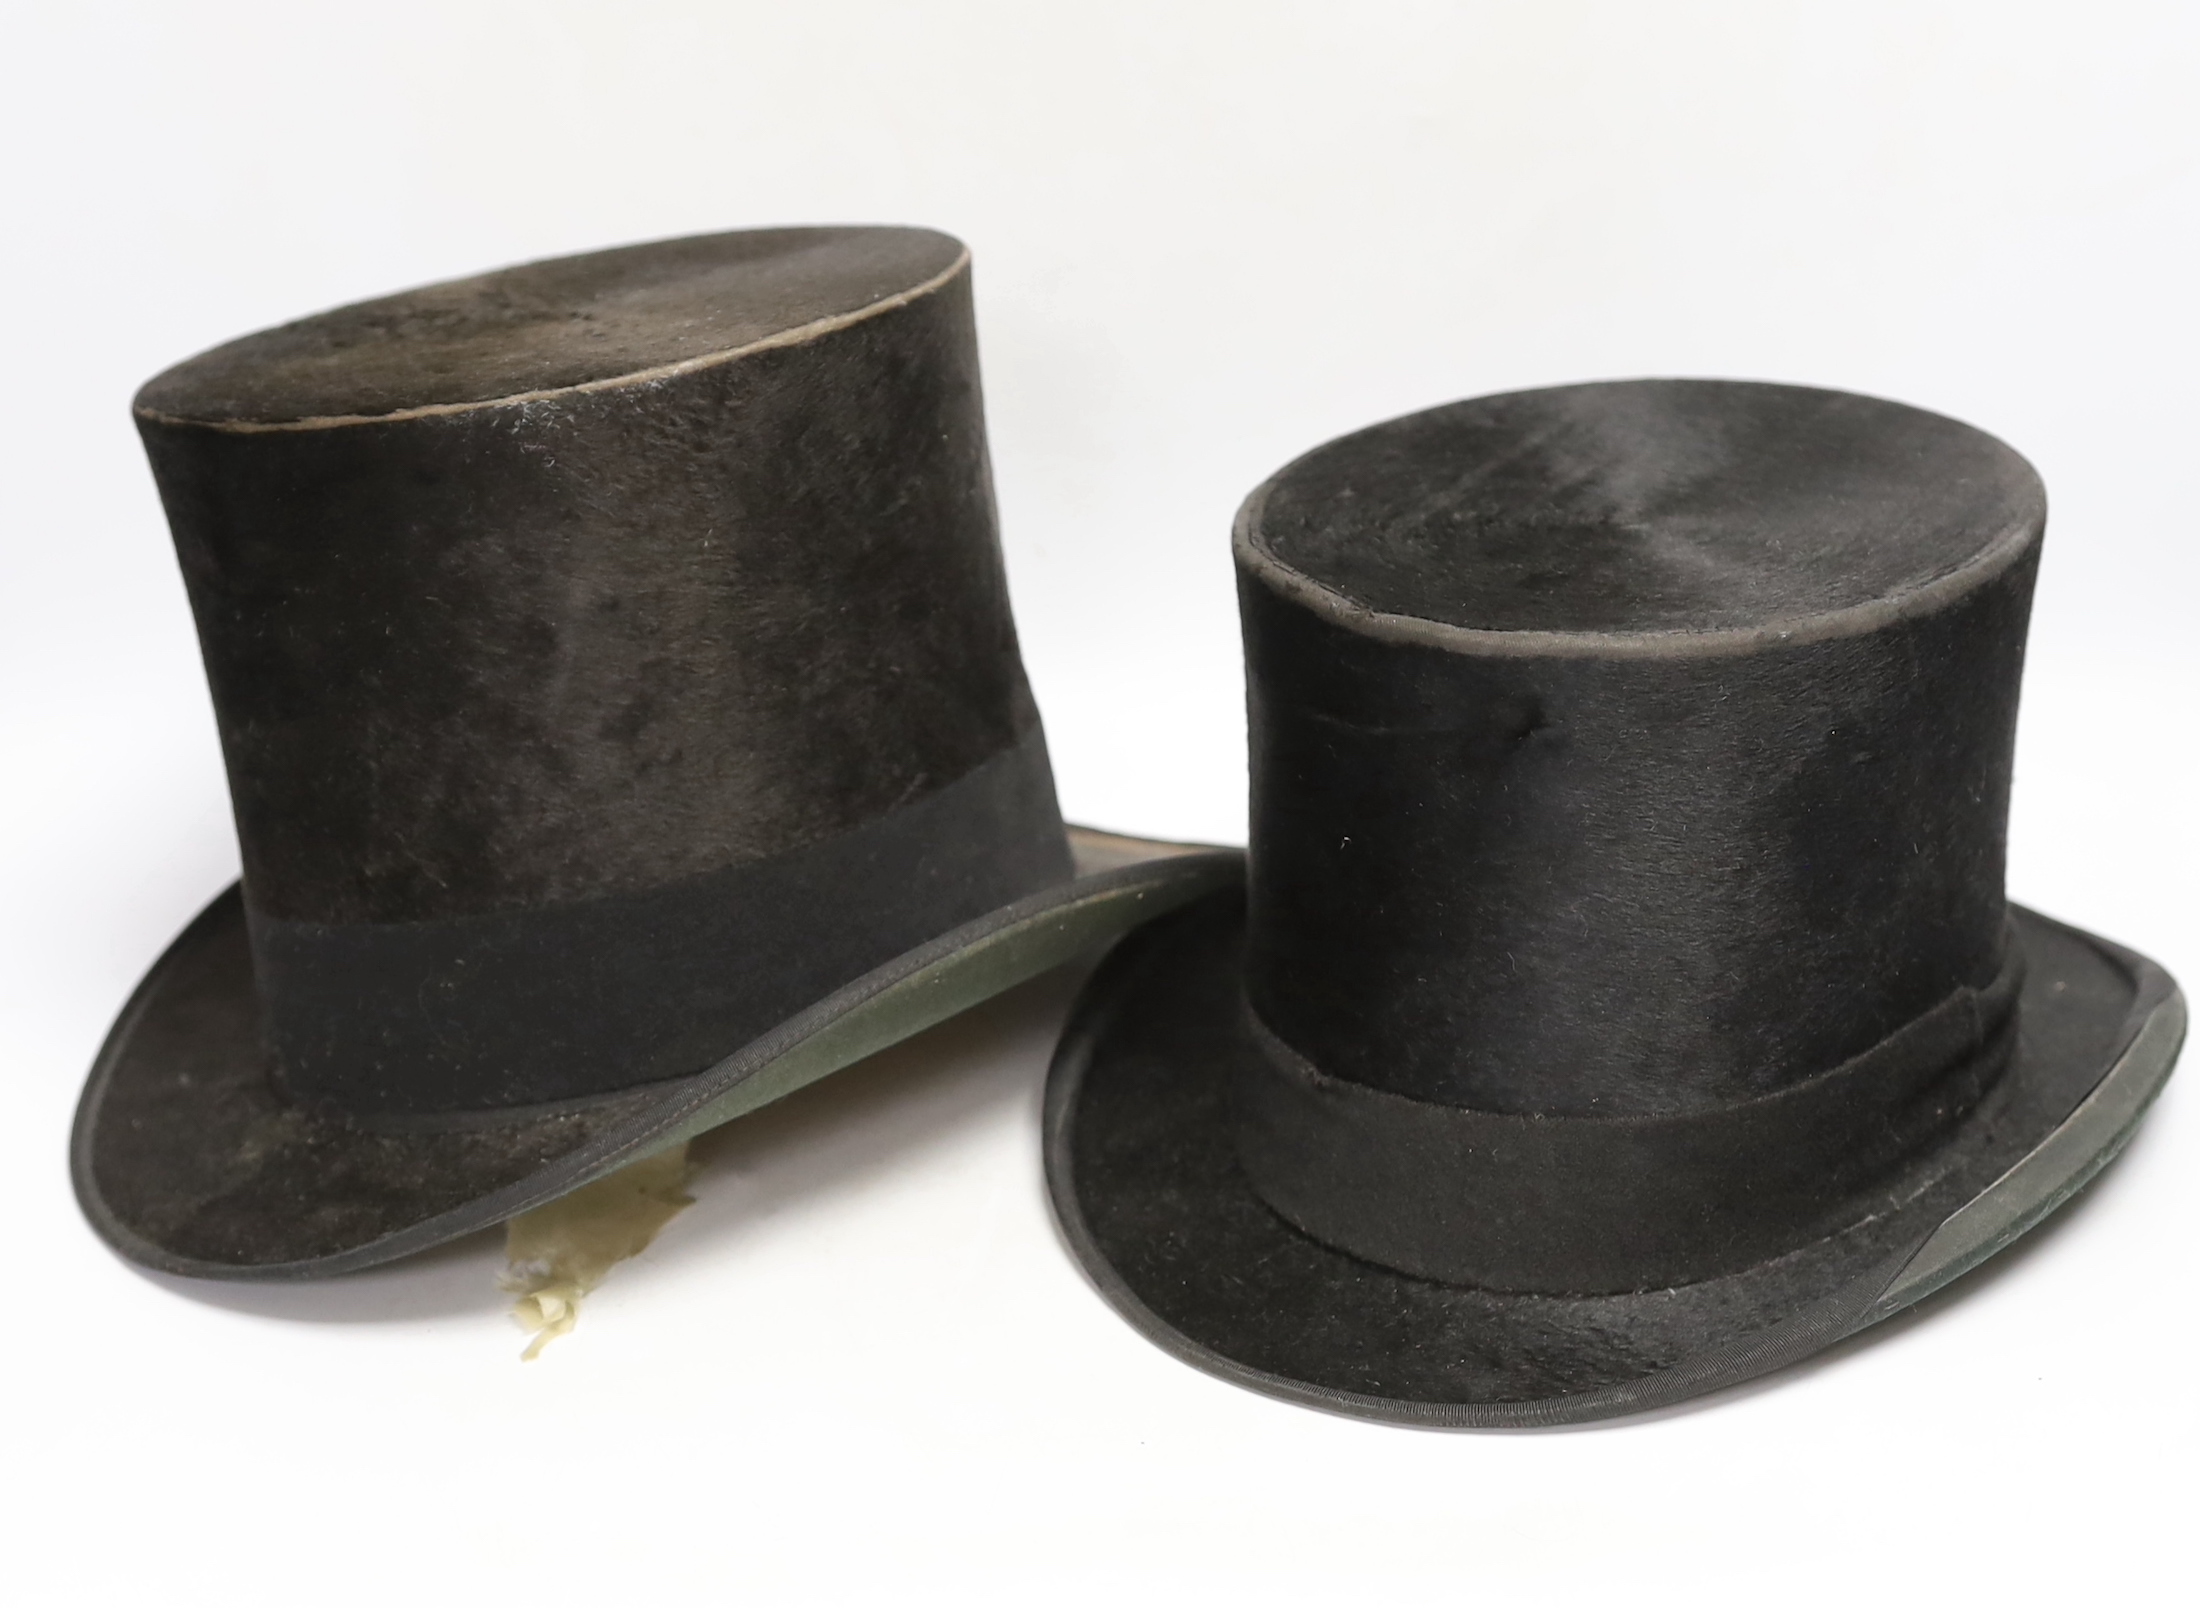 Two top hats and a straw boater